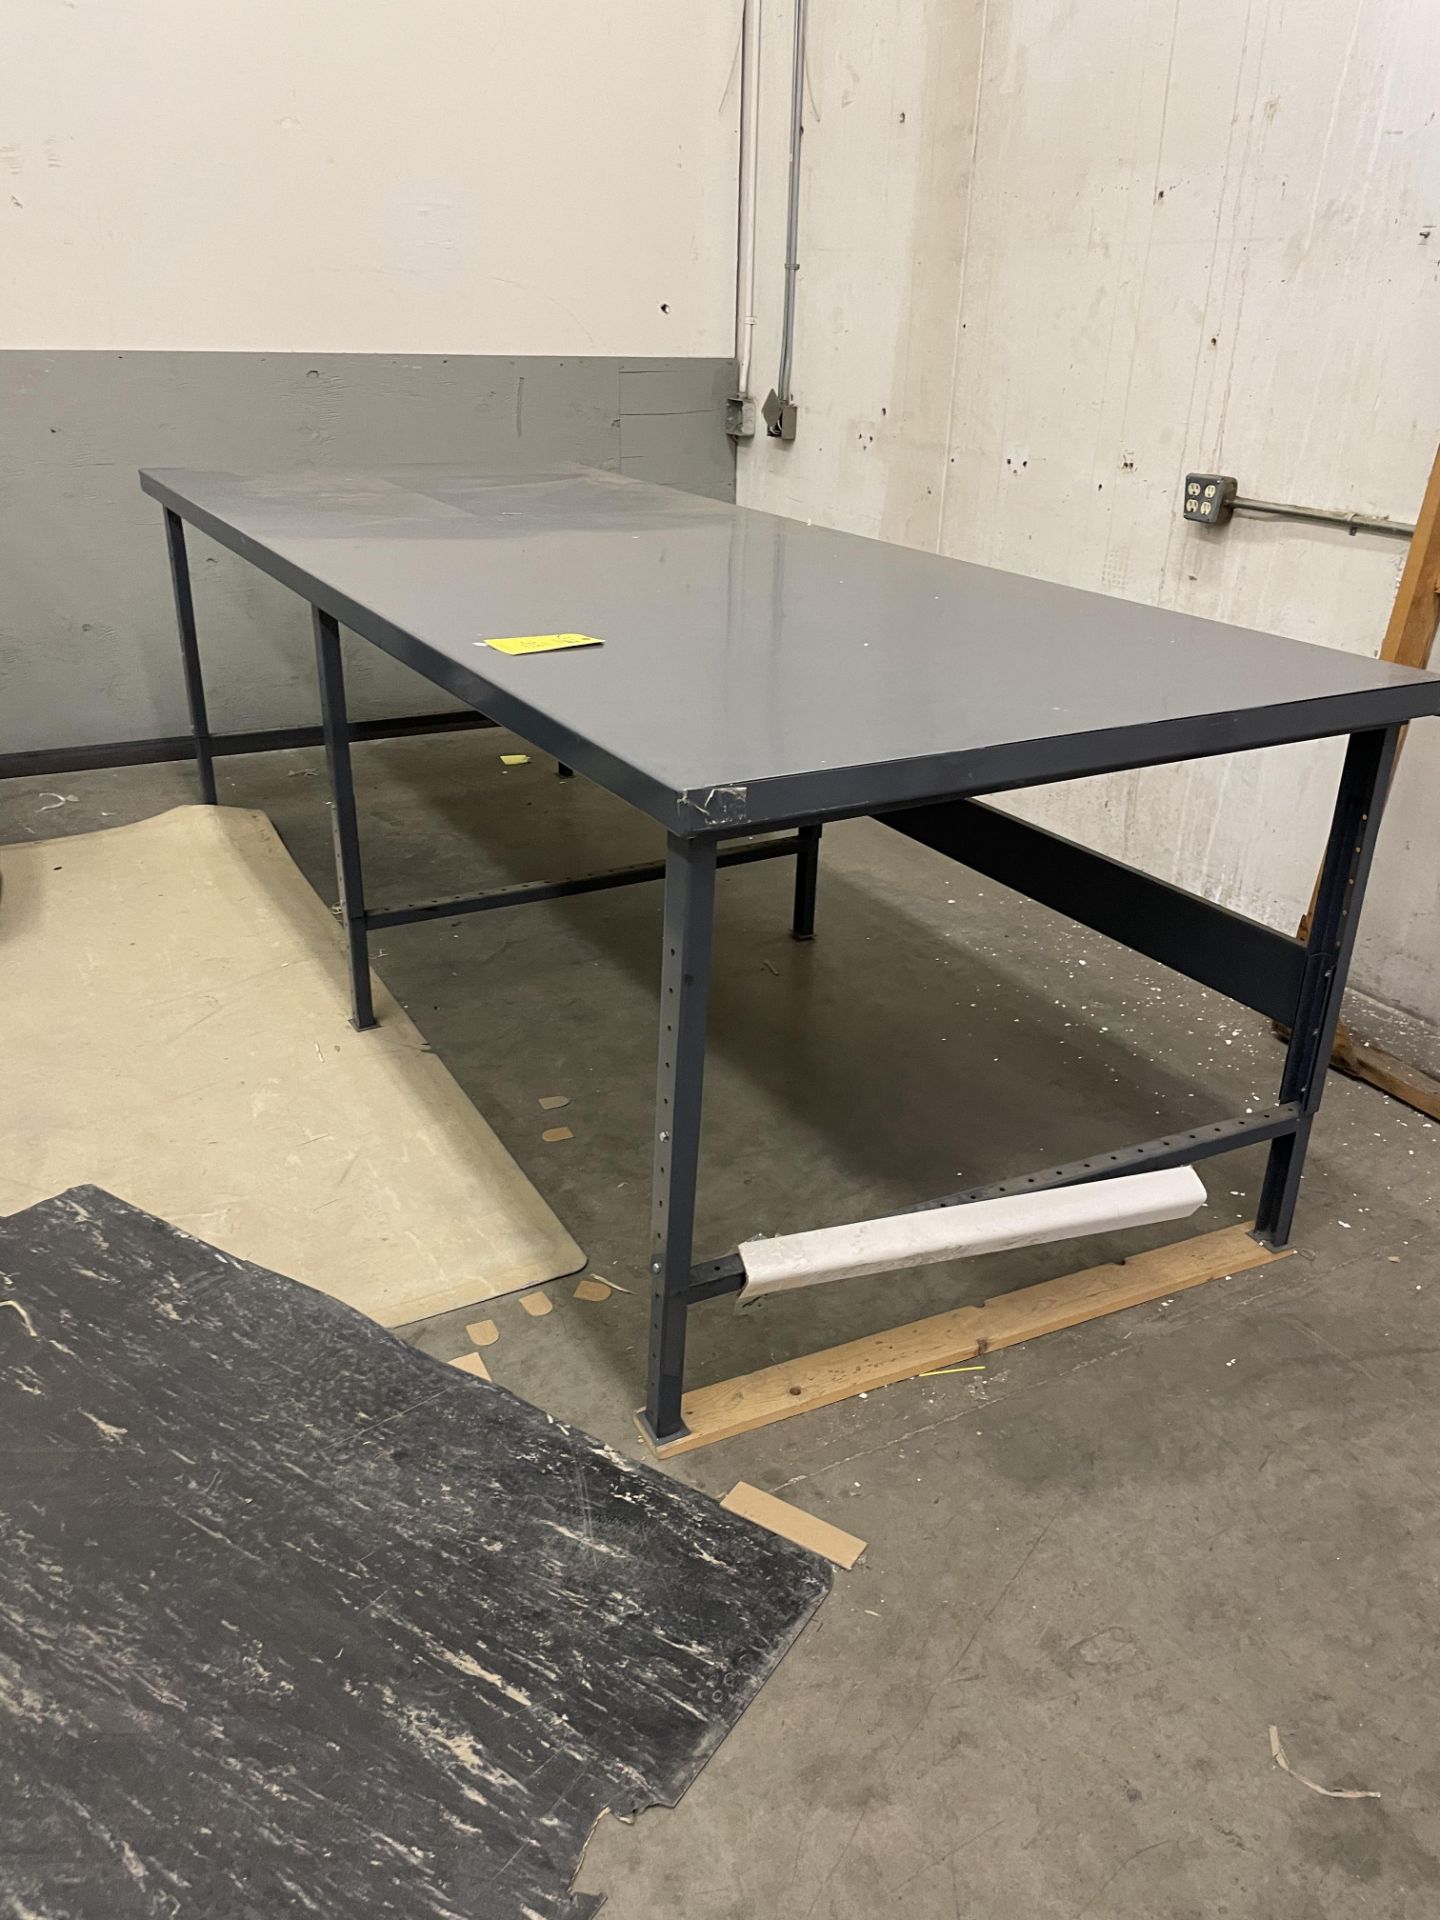 Metal Tables Lot of (3) Loading/Rigging Fee $75